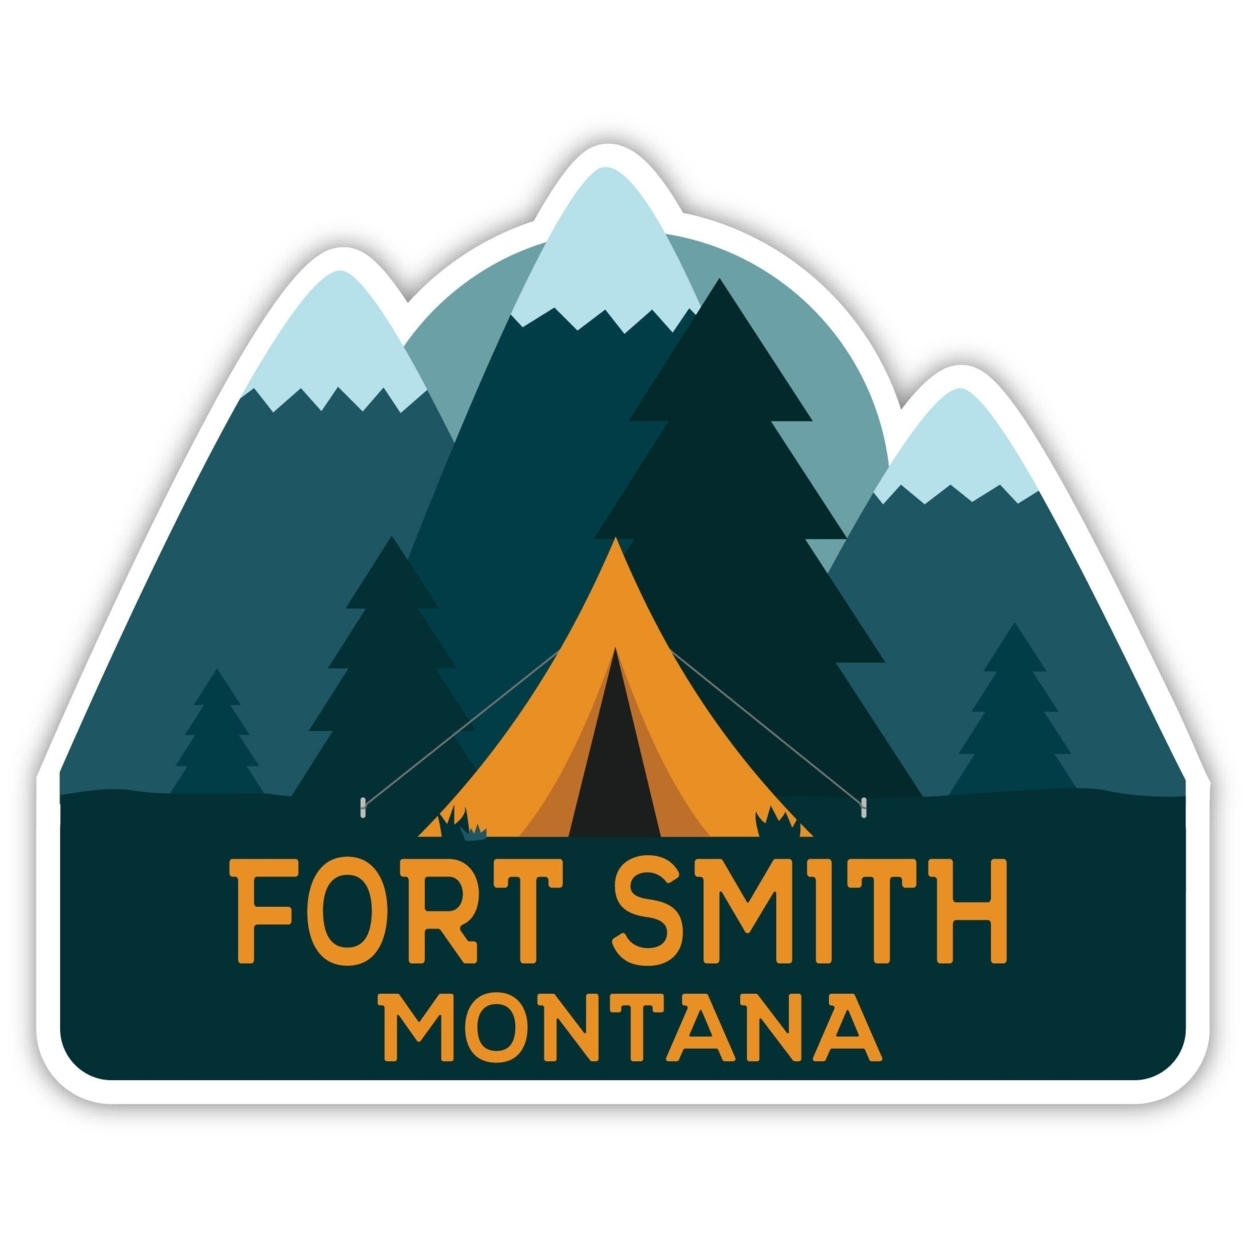 Fort Smith Montana Souvenir Decorative Stickers (Choose Theme And Size) - 4-Pack, 4-Inch, Tent